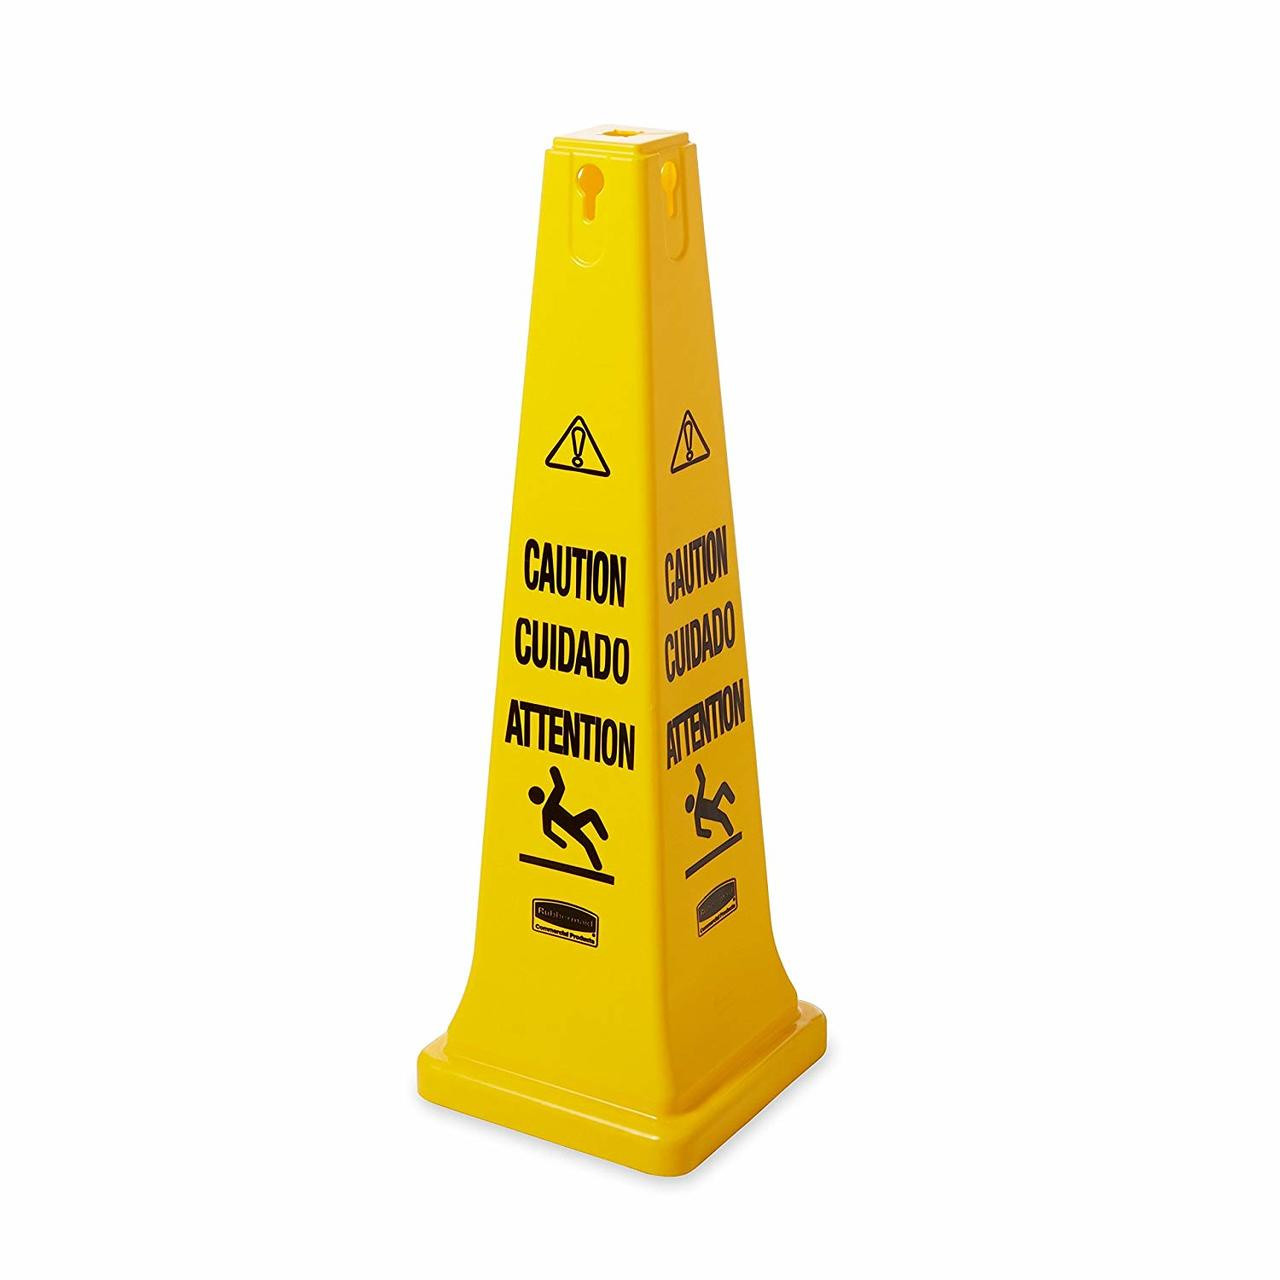 Rubbermaid Safety Cone - Multilingual Caution And Wet Floor Symbol - 91cm - FG627600YEL